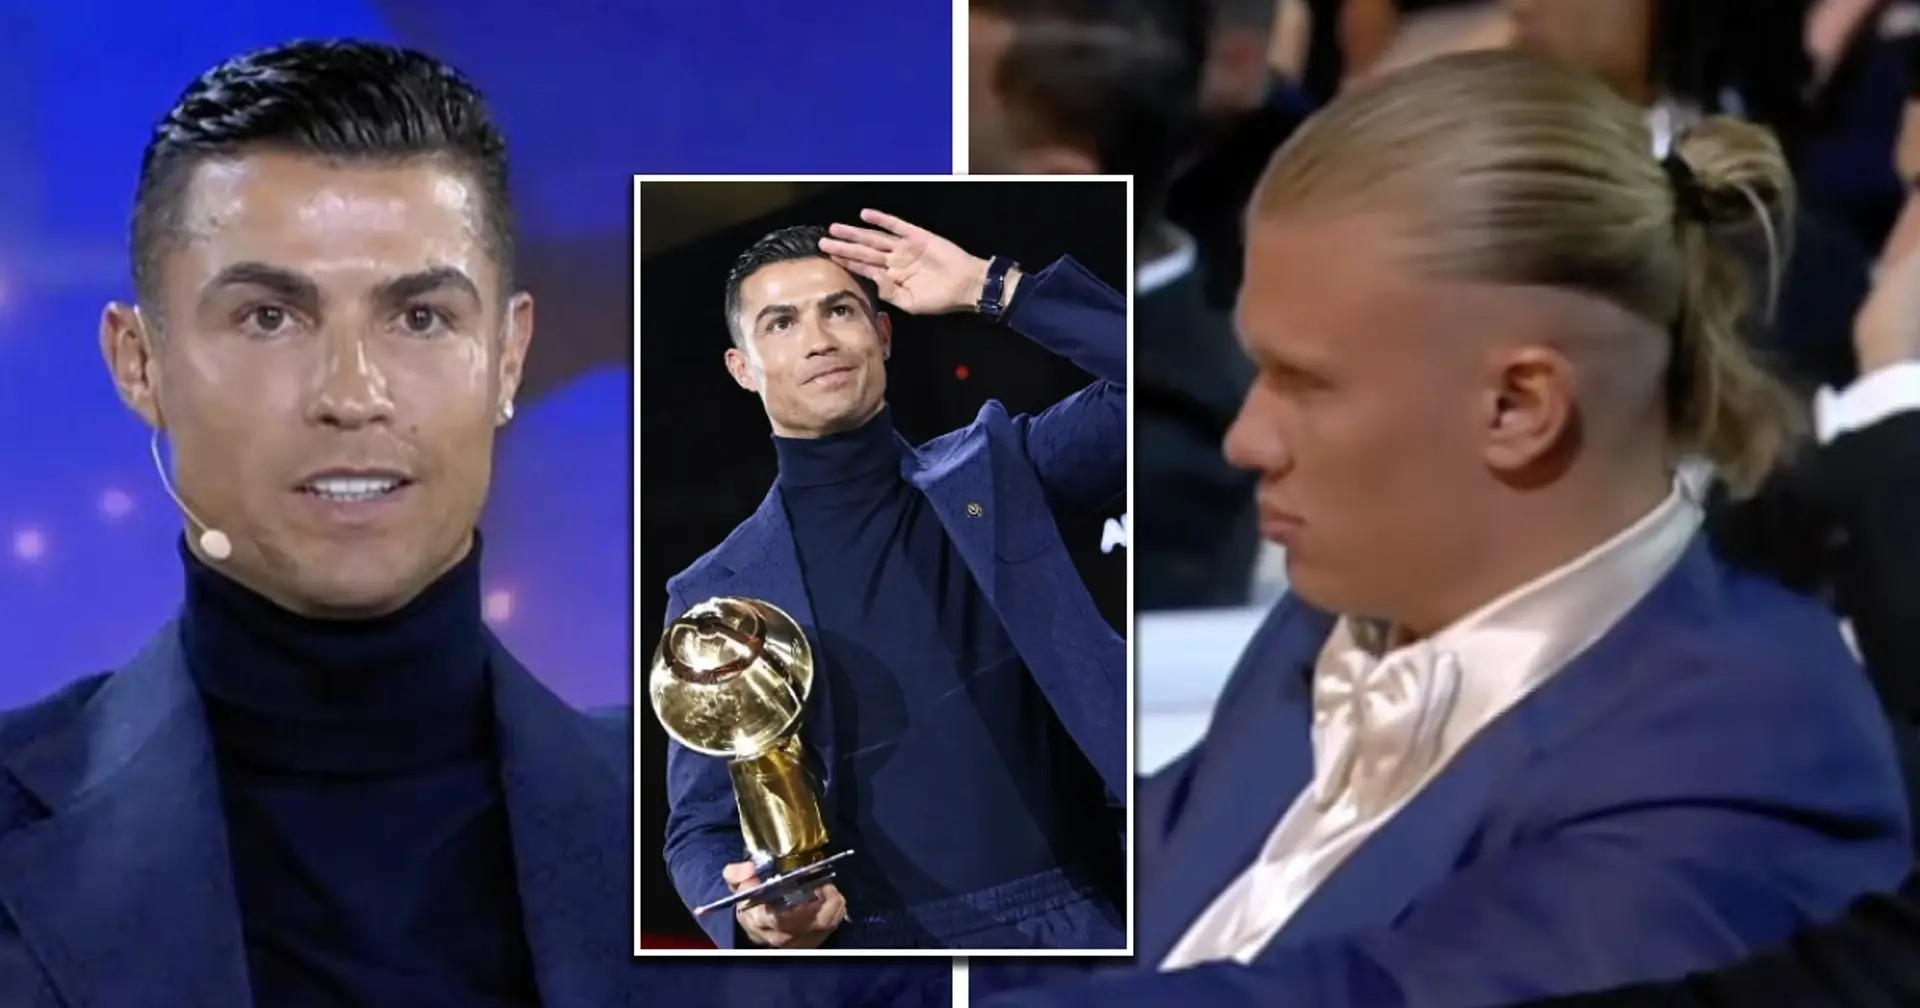 'I had to beat the young lions': Haaland reacts to Ronaldo calling himself the 'best goalscorer' 